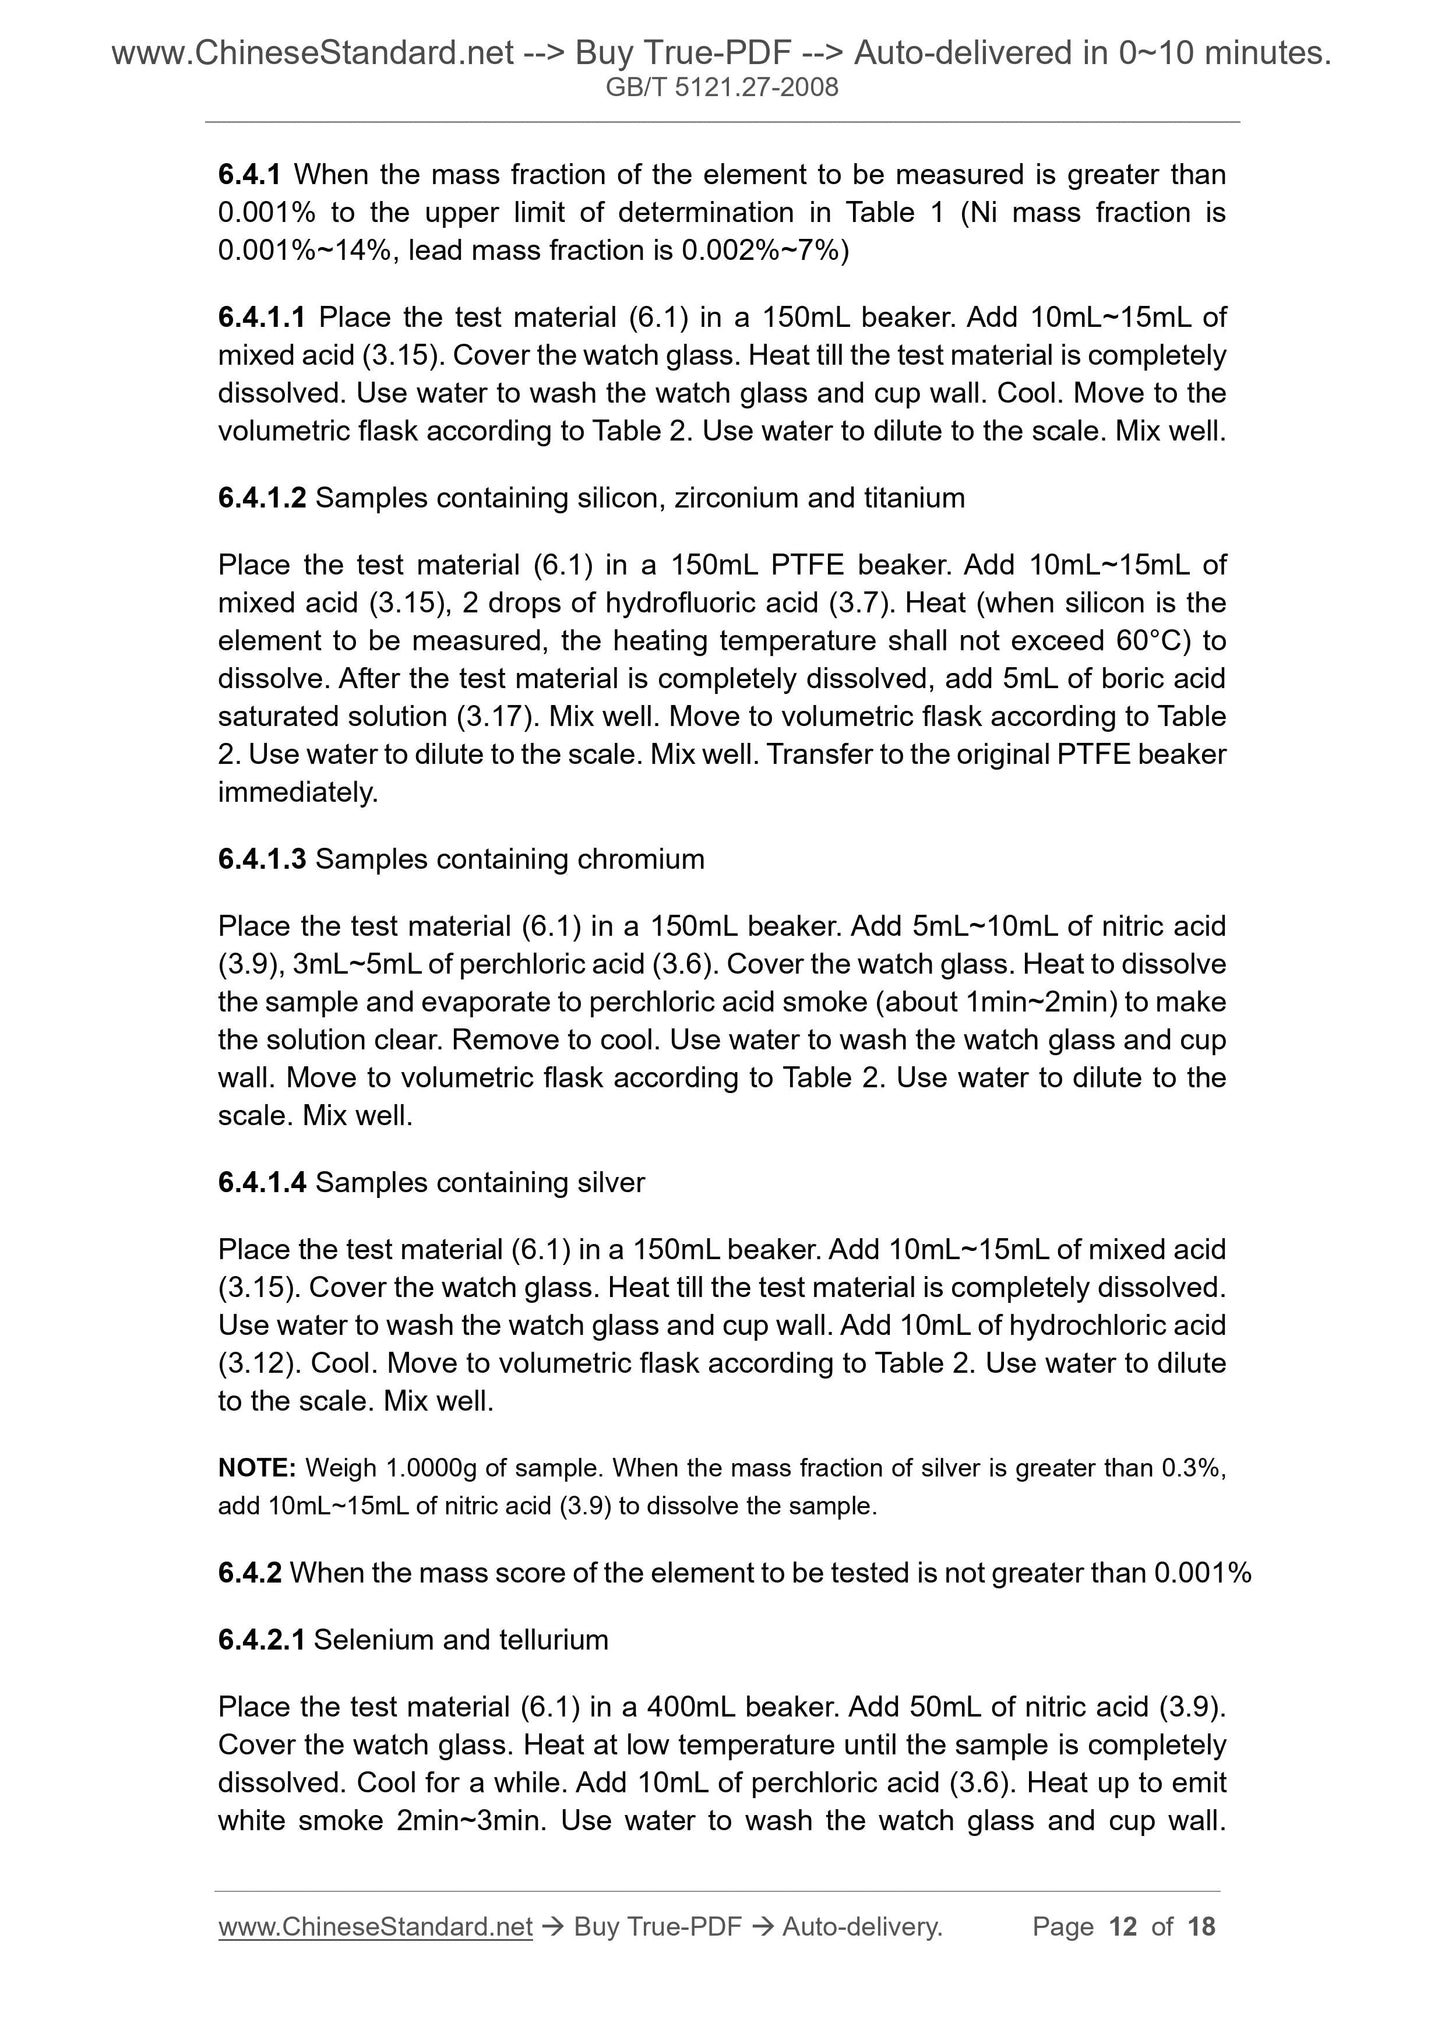 GB/T 5121.27-2008 Page 6